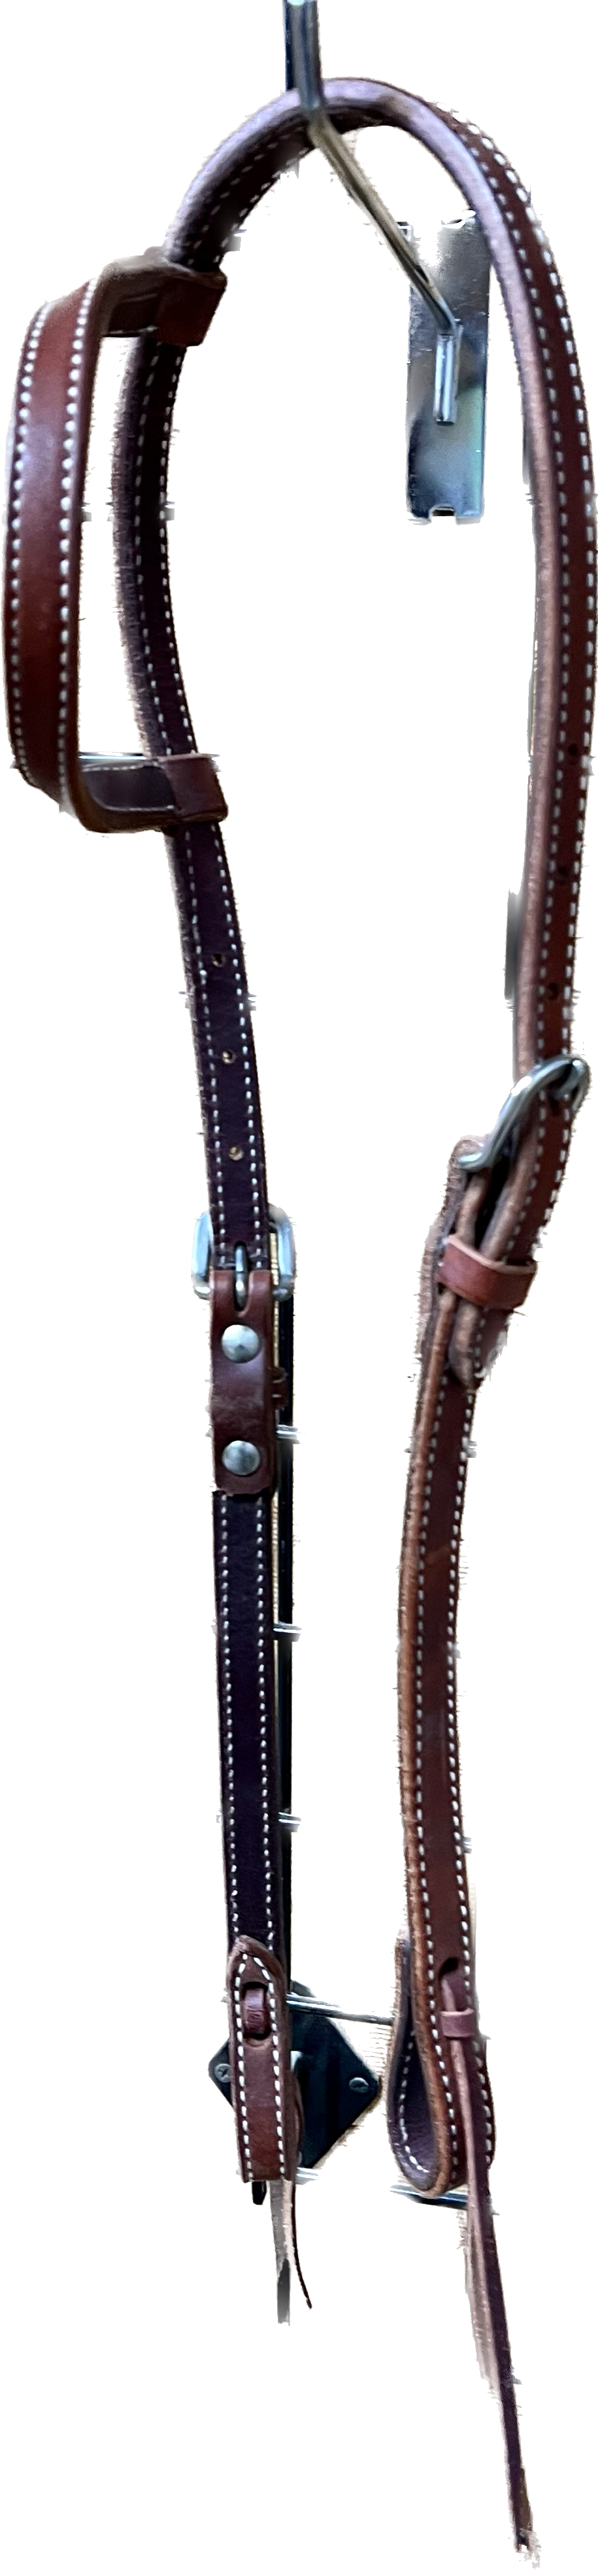 One Ear Headstall, Doubled and Stitched